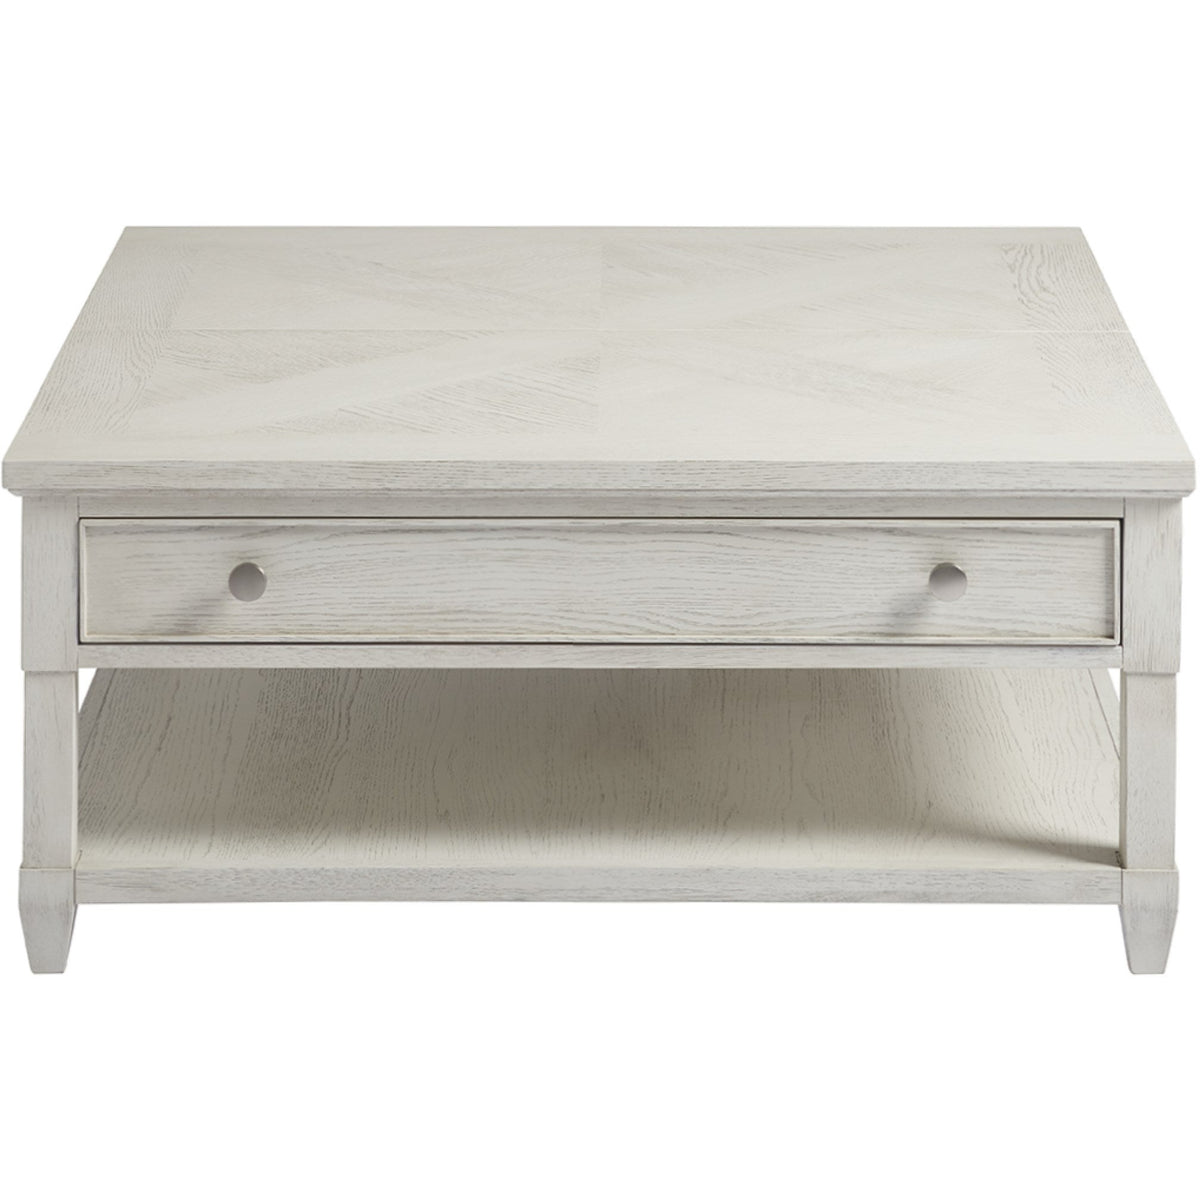 Topsail Lifttop Table - Be Bold Furniture